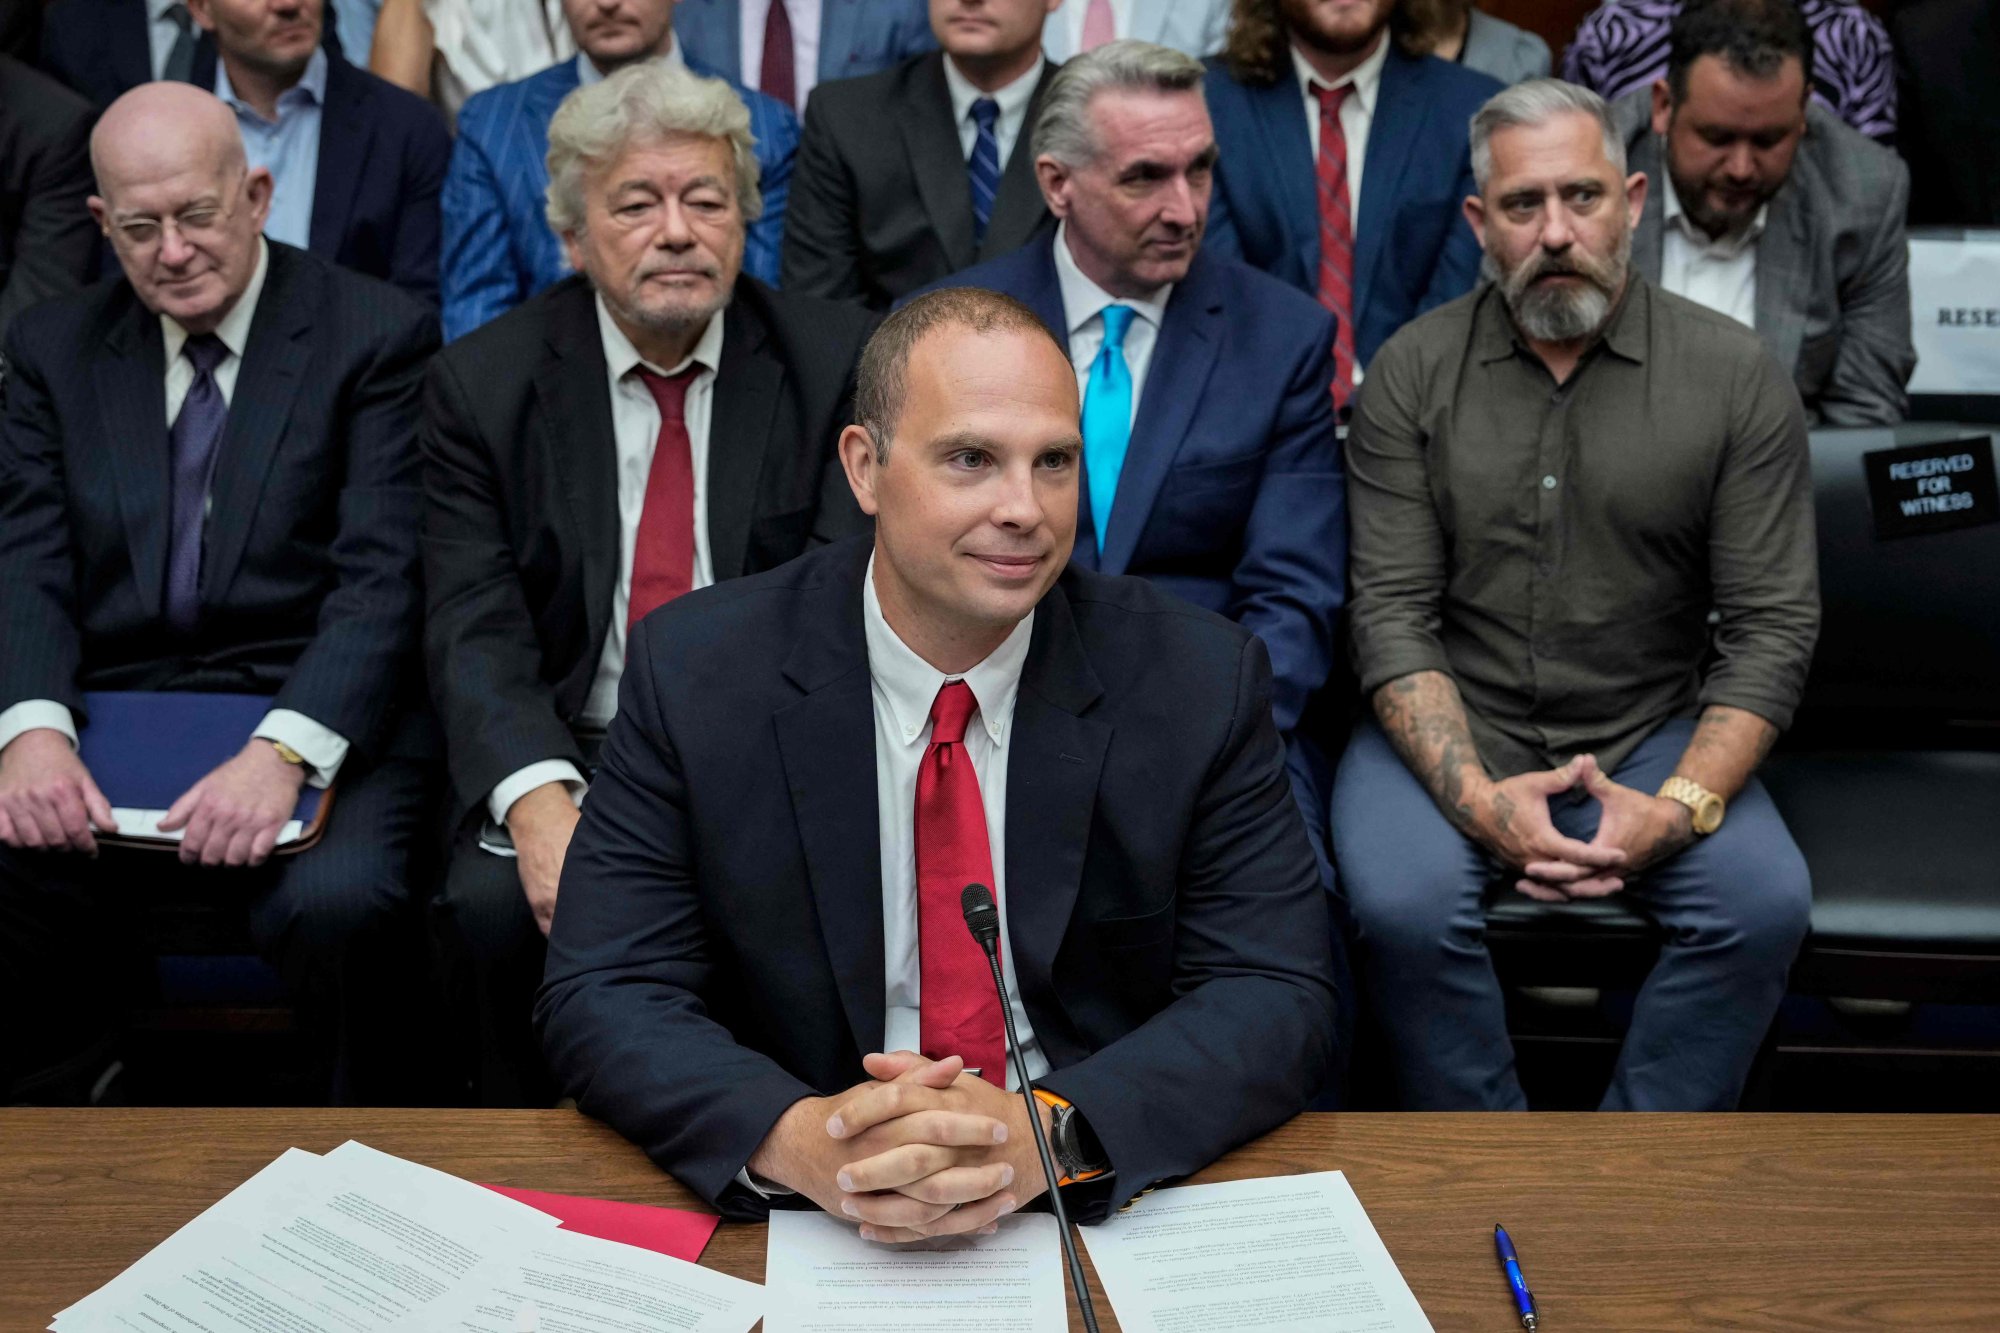 David Grusch, a former intelligence officer, preparing to testify on Wednesday at the hearing, which was titled “Unidentified Anomalous Phenomena: Implications on National Security, Public Safety and Government Transparency”. Photo: Getty Images/AFP